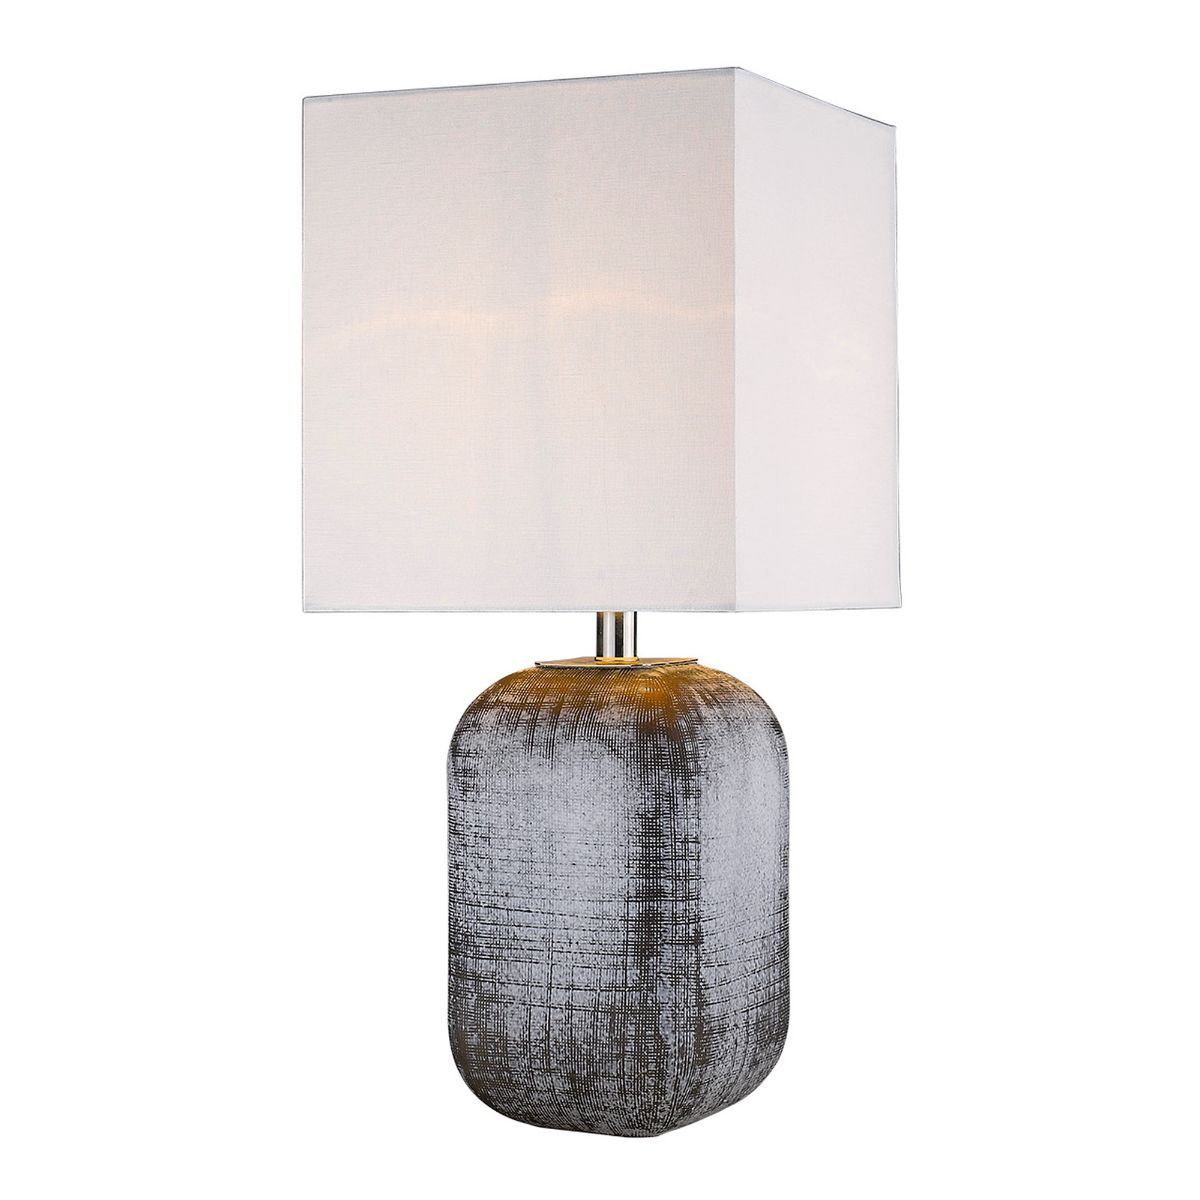 Trend Home 1 Light Table Lamp Blue/Gray Glass Body and Polished Nickel Accents